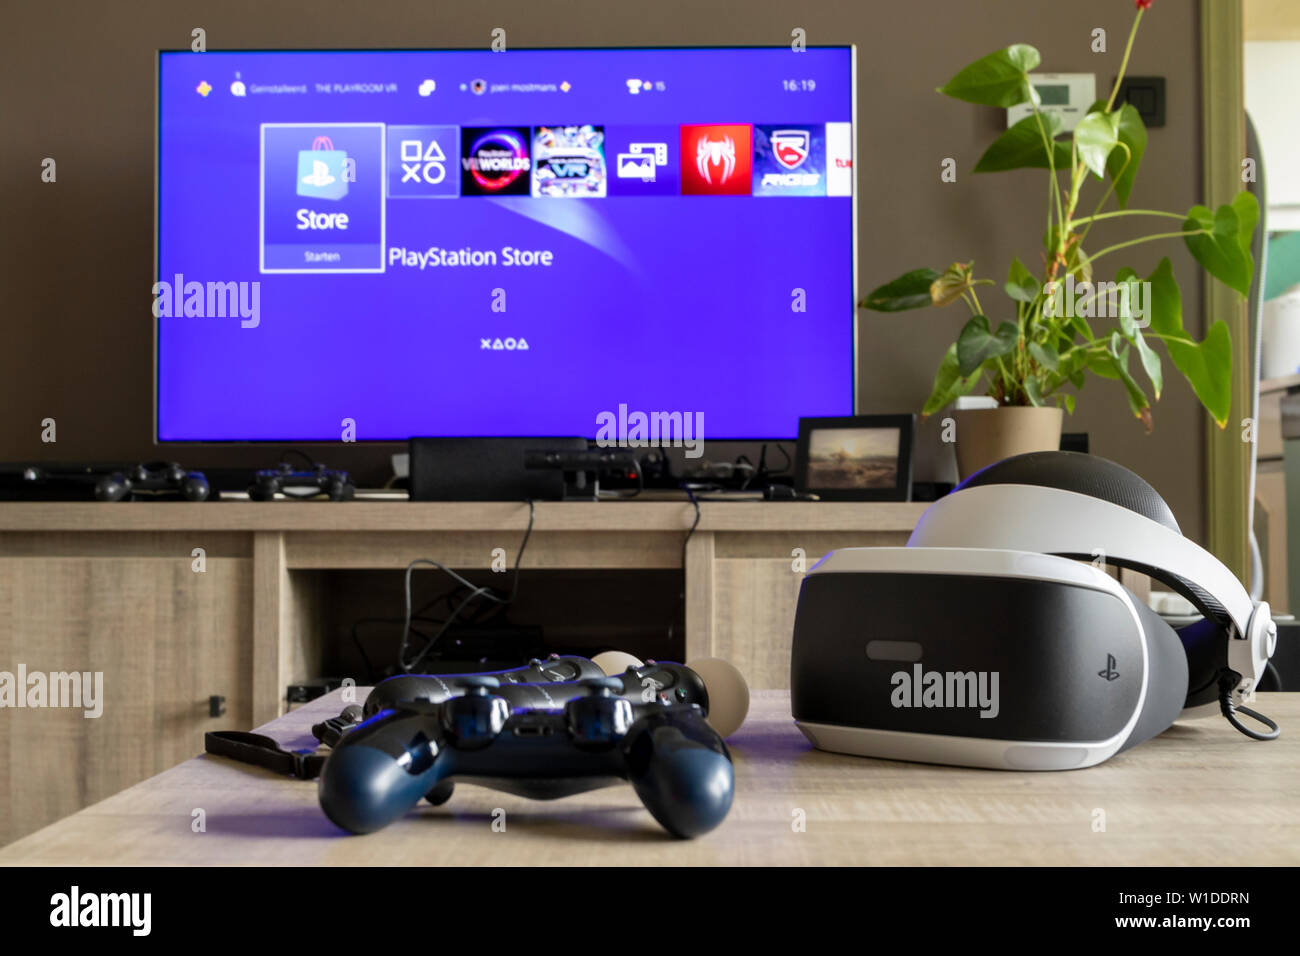 A playstation VR headset on a wooden table together with a PS4 controller  and some playstation move controllers. In the background there is a TV  Stock Photo - Alamy